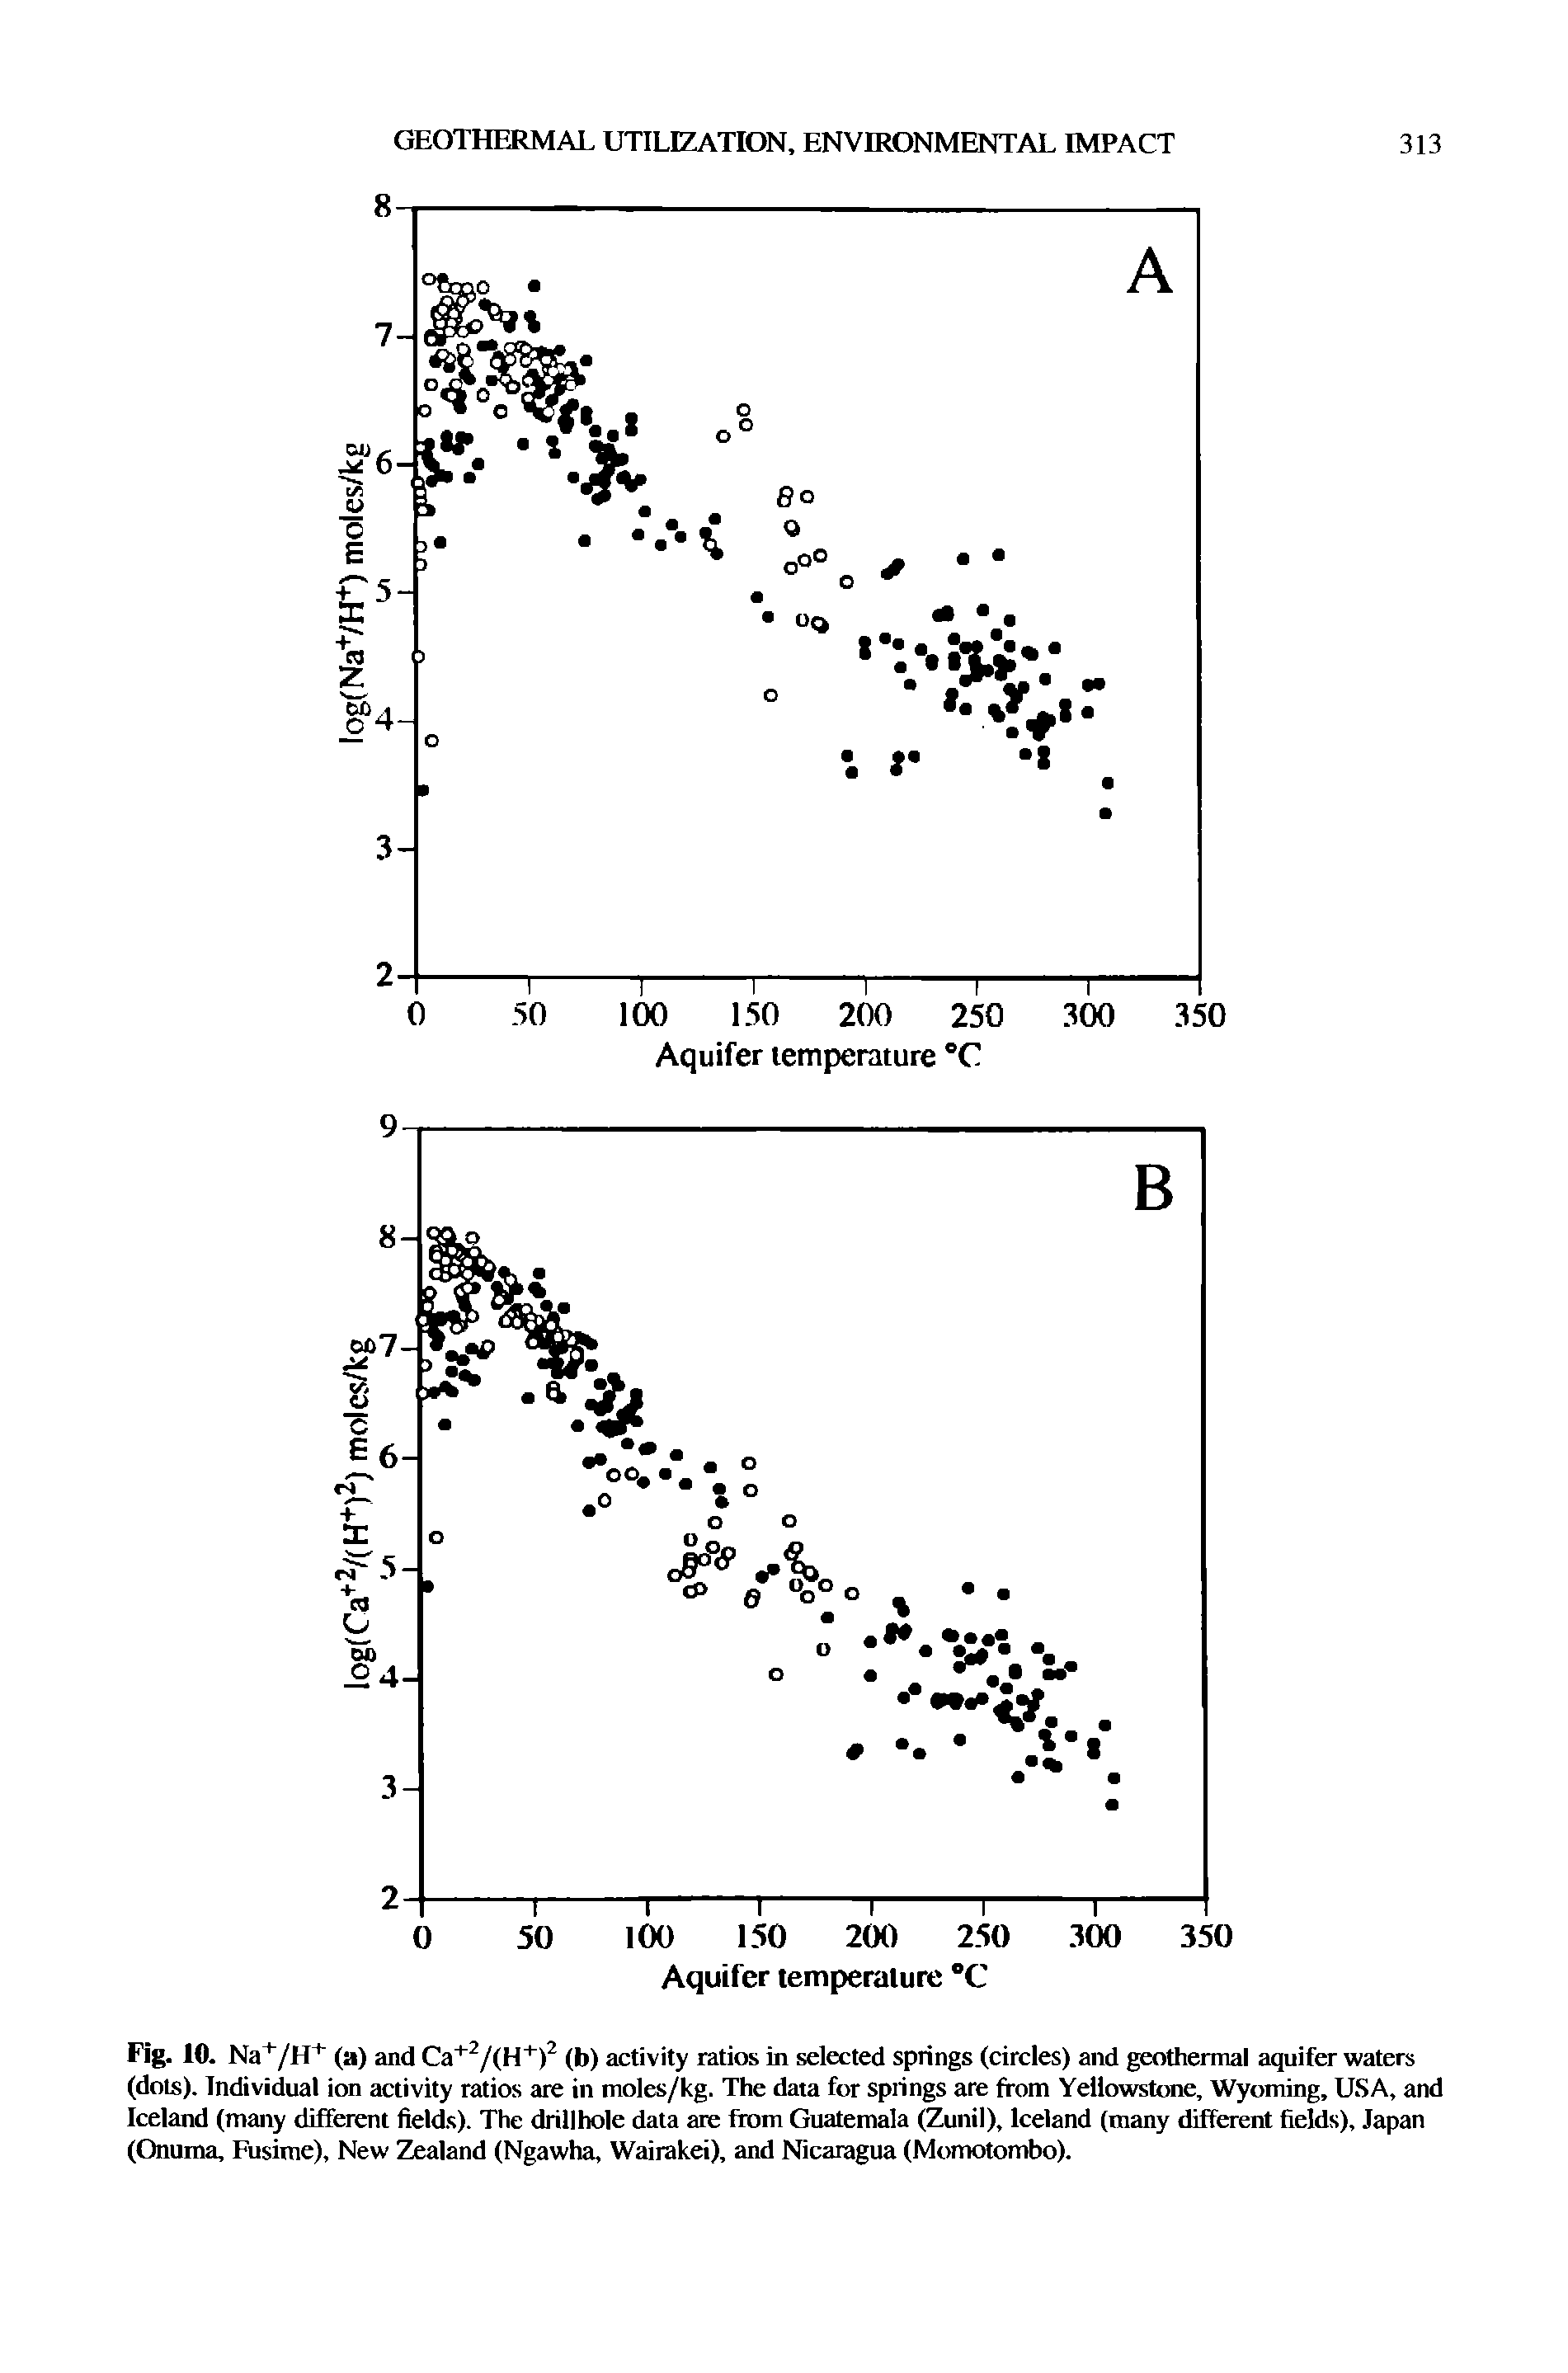 Fig. 10. Na+/H+ (a) and Ca+2/(H+)2 (b) activity ratios in selected springs (circles) and geothermal aquifer waters (dols). Individual ion activity ratios are in moles/kg. The data for springs are from Yellowstone, Wyoming, USA, and Iceland (many different fields). The drillhole data are from Guatemala (Zunil), Iceland (many different fields), Japan (Onuma, Fusime), New Zealand (Ngawha, Wairakei), and Nicaragua (Momotombo).